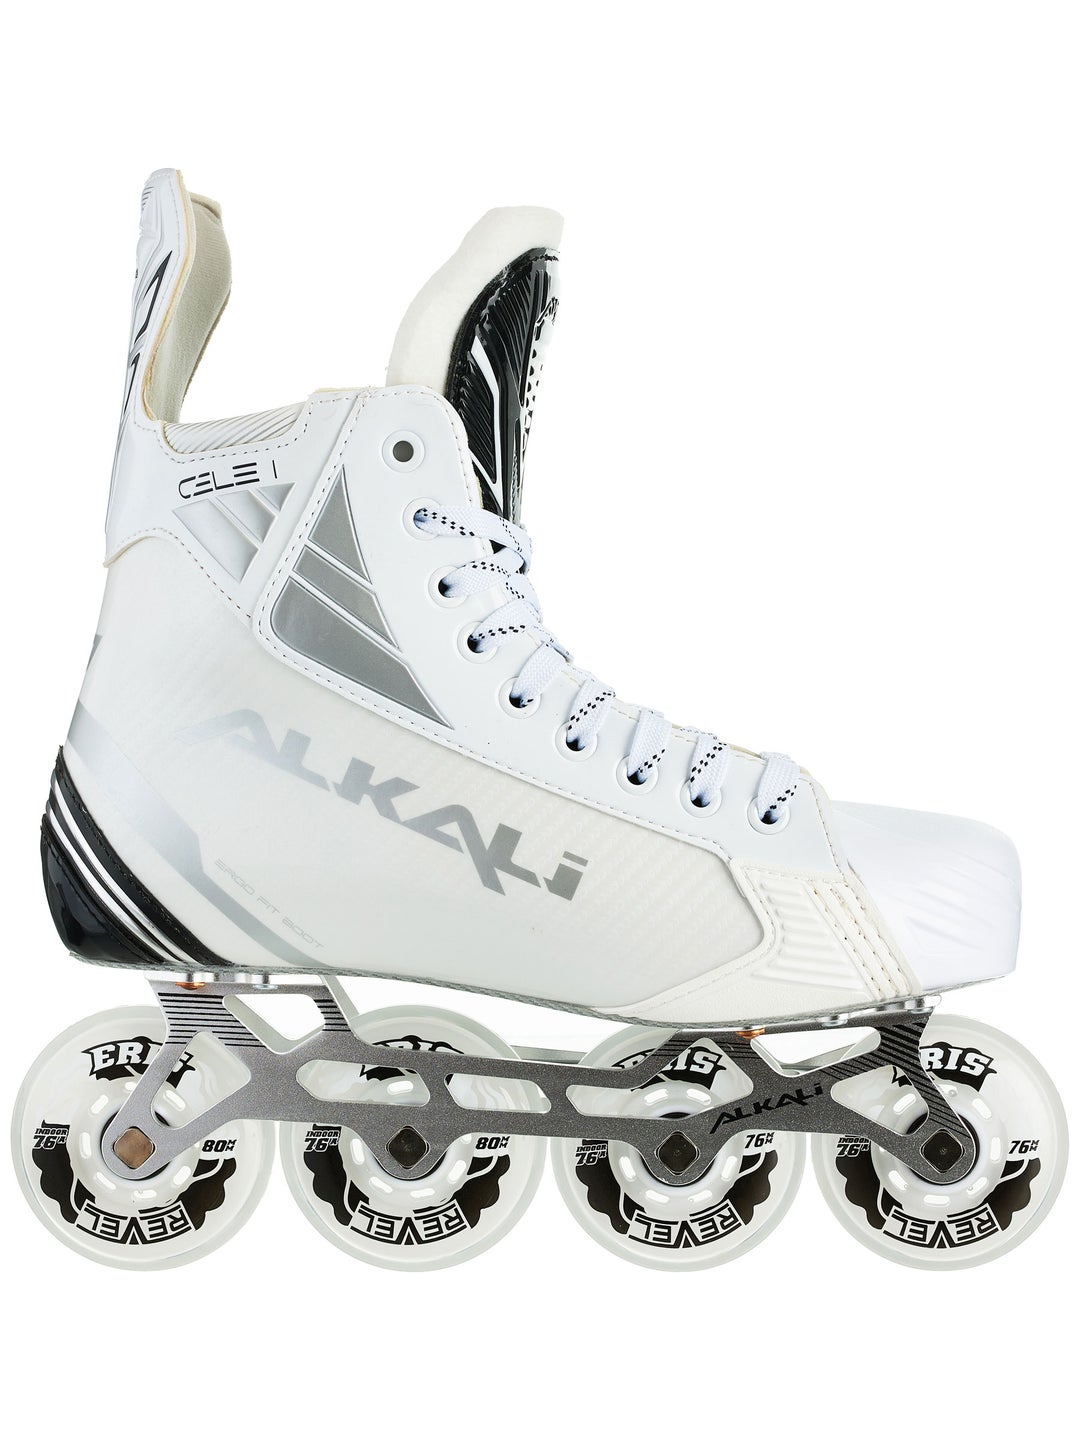 Roller hockey Stock Photos, Royalty Free Roller hockey Images